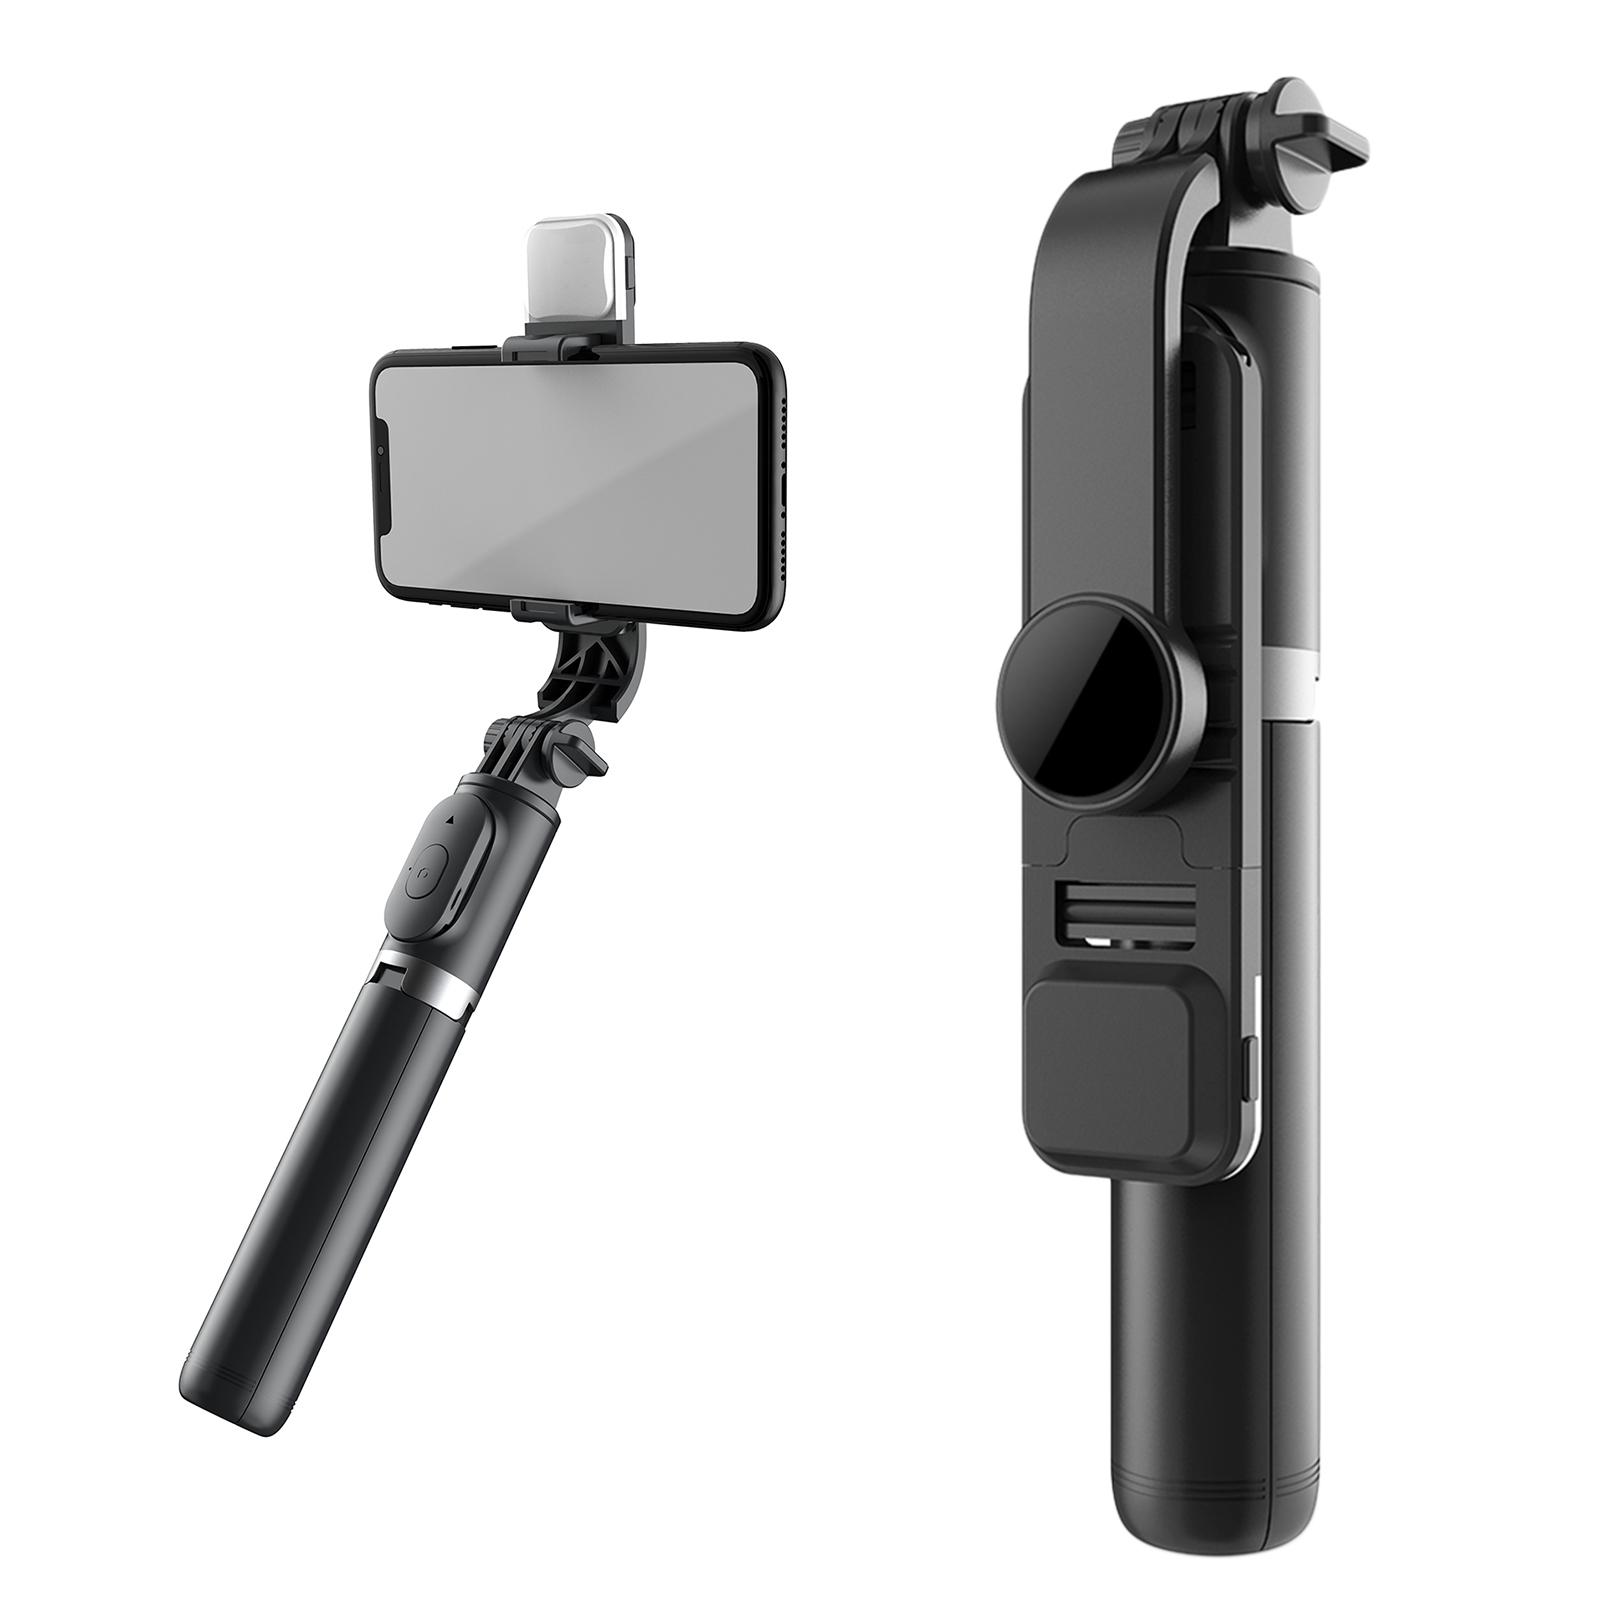 2xExtendable Selfie Stick Monopod Tripod  for IOS/Android Black+Fill Light